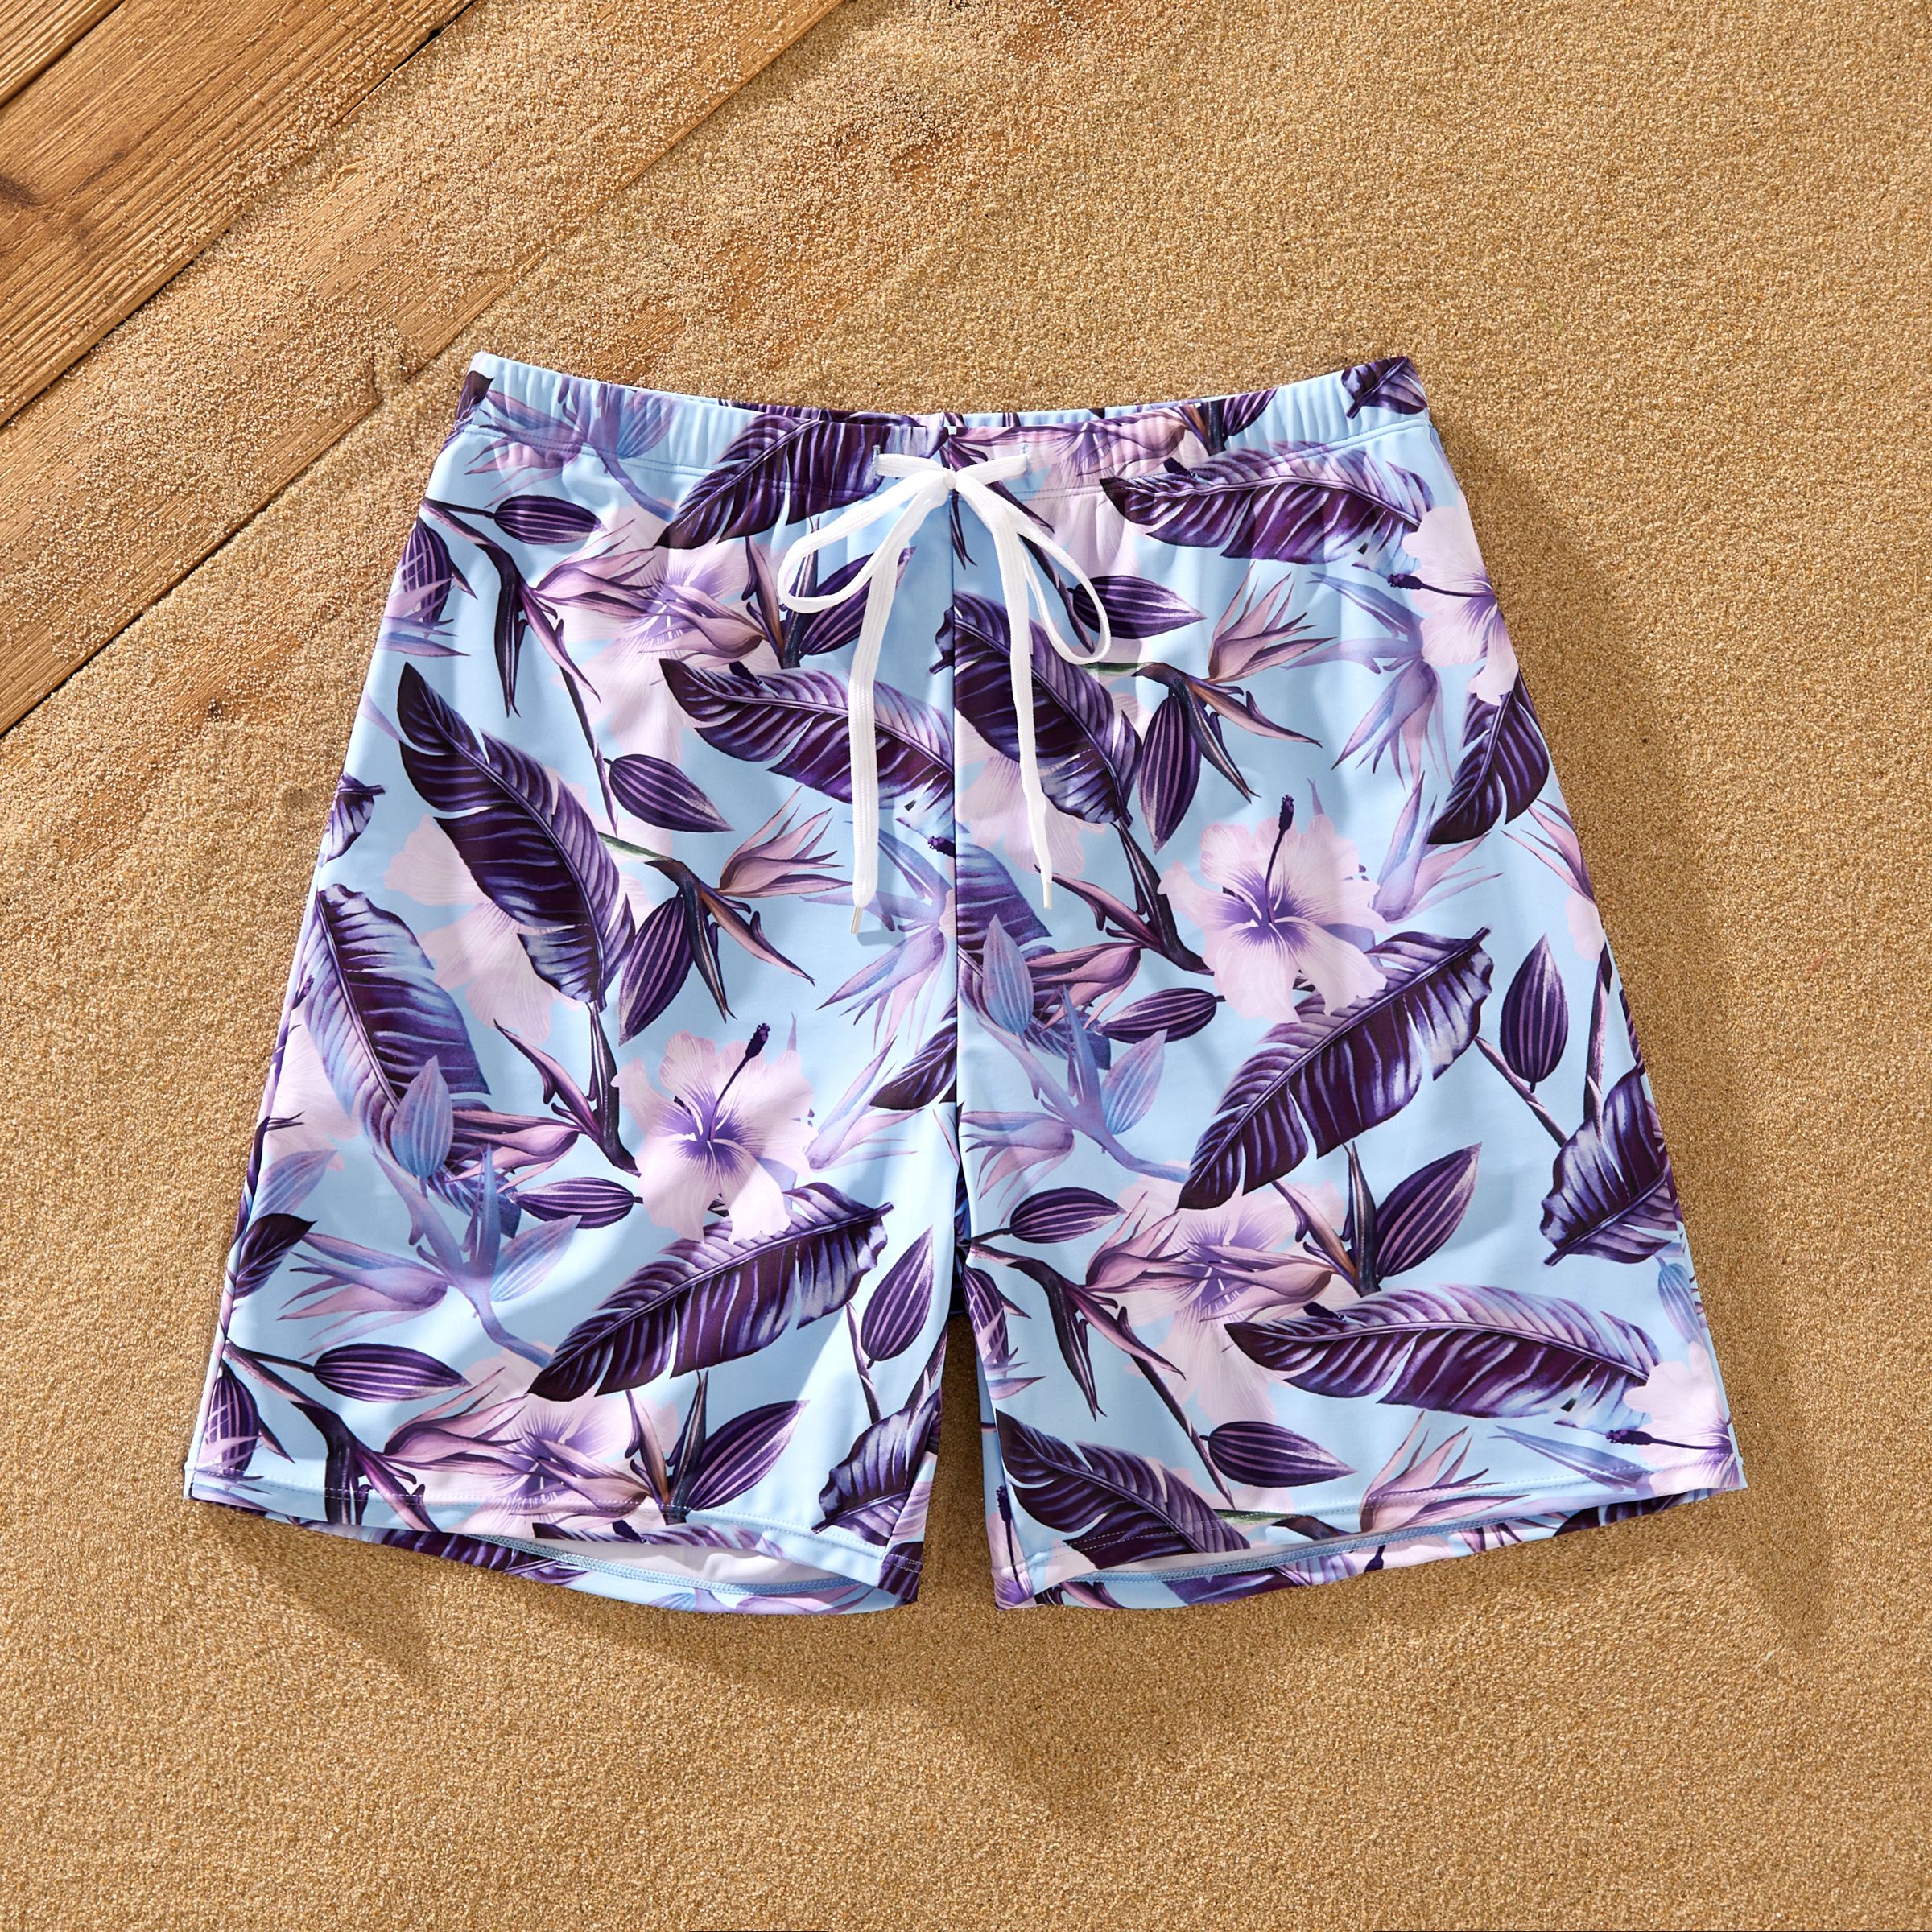 Family Matching Blue And Purple Floral Swim Trunks Or Ruffle Sleeves Swimsuit